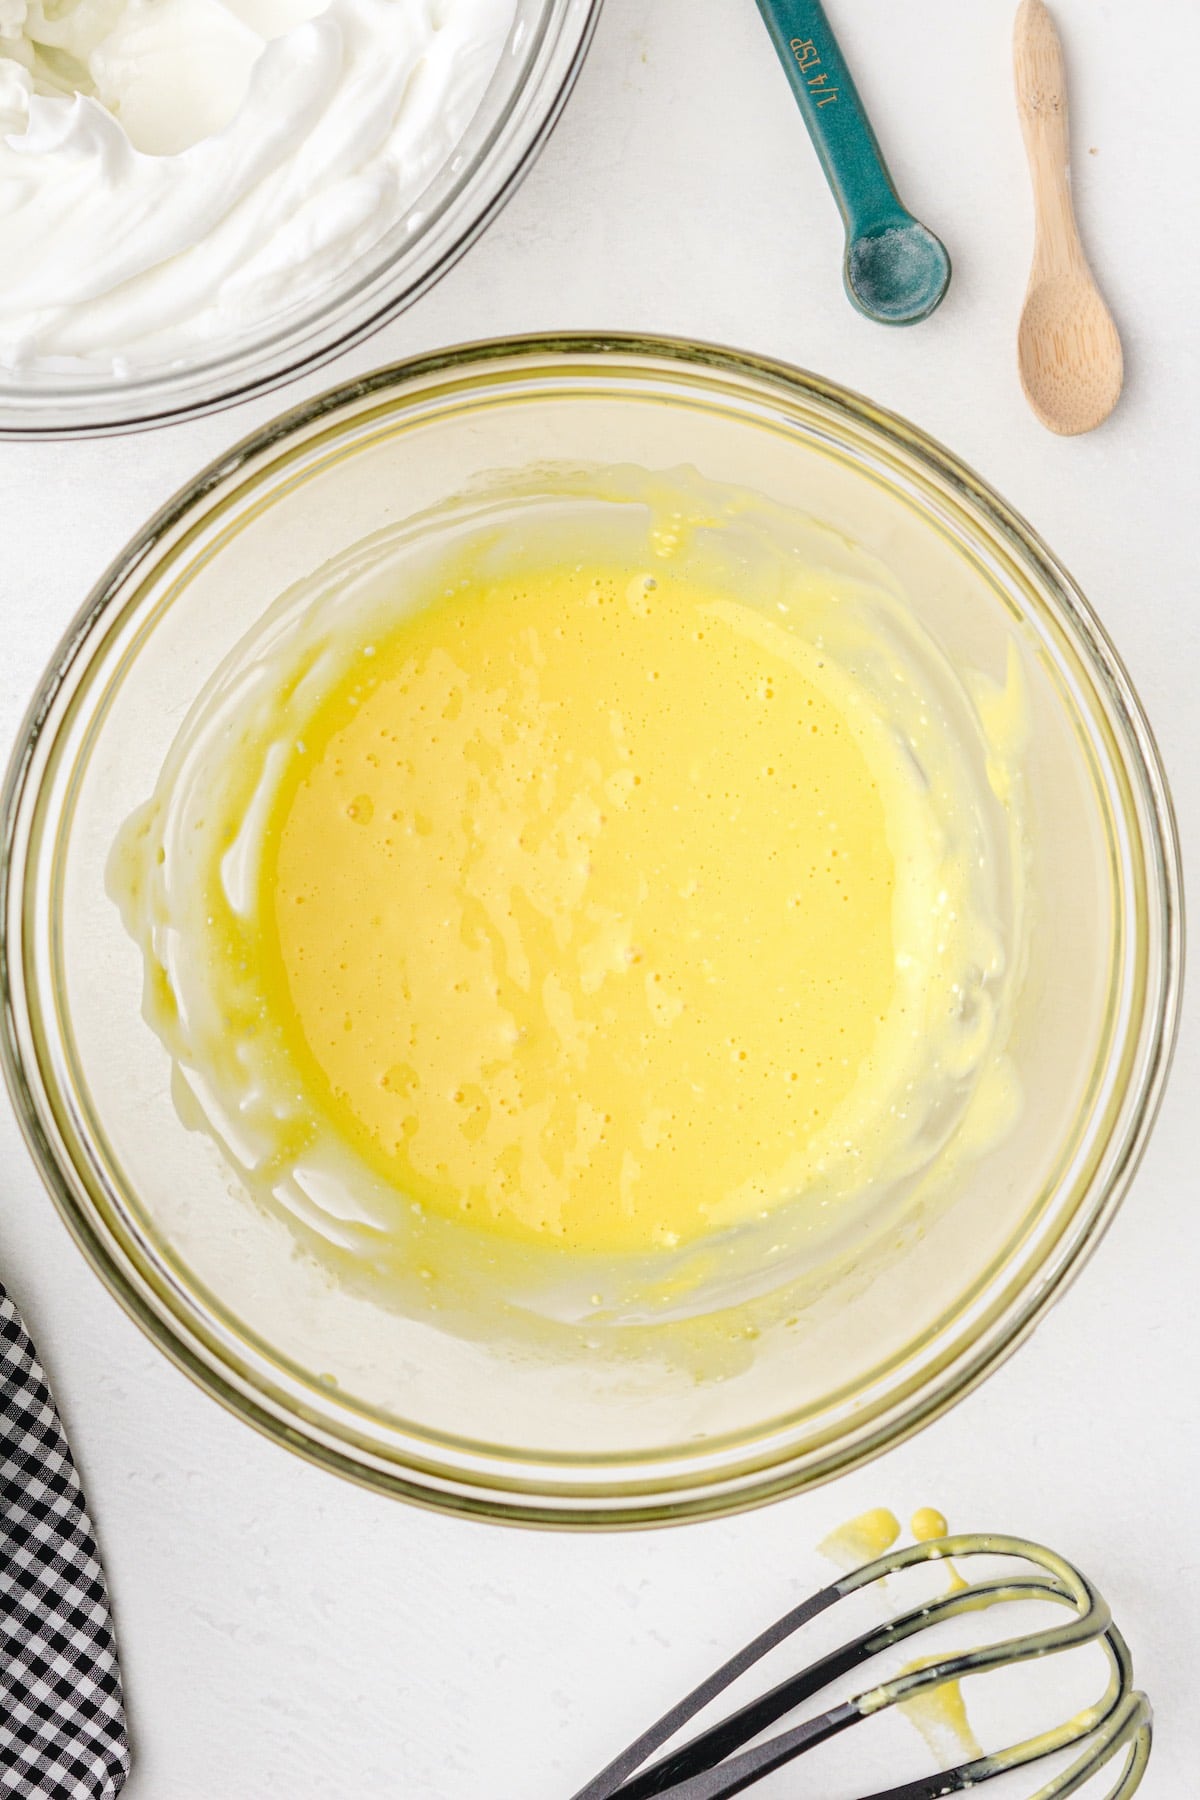 mixture of egg yolks, salt, and cream cheese in a bowl